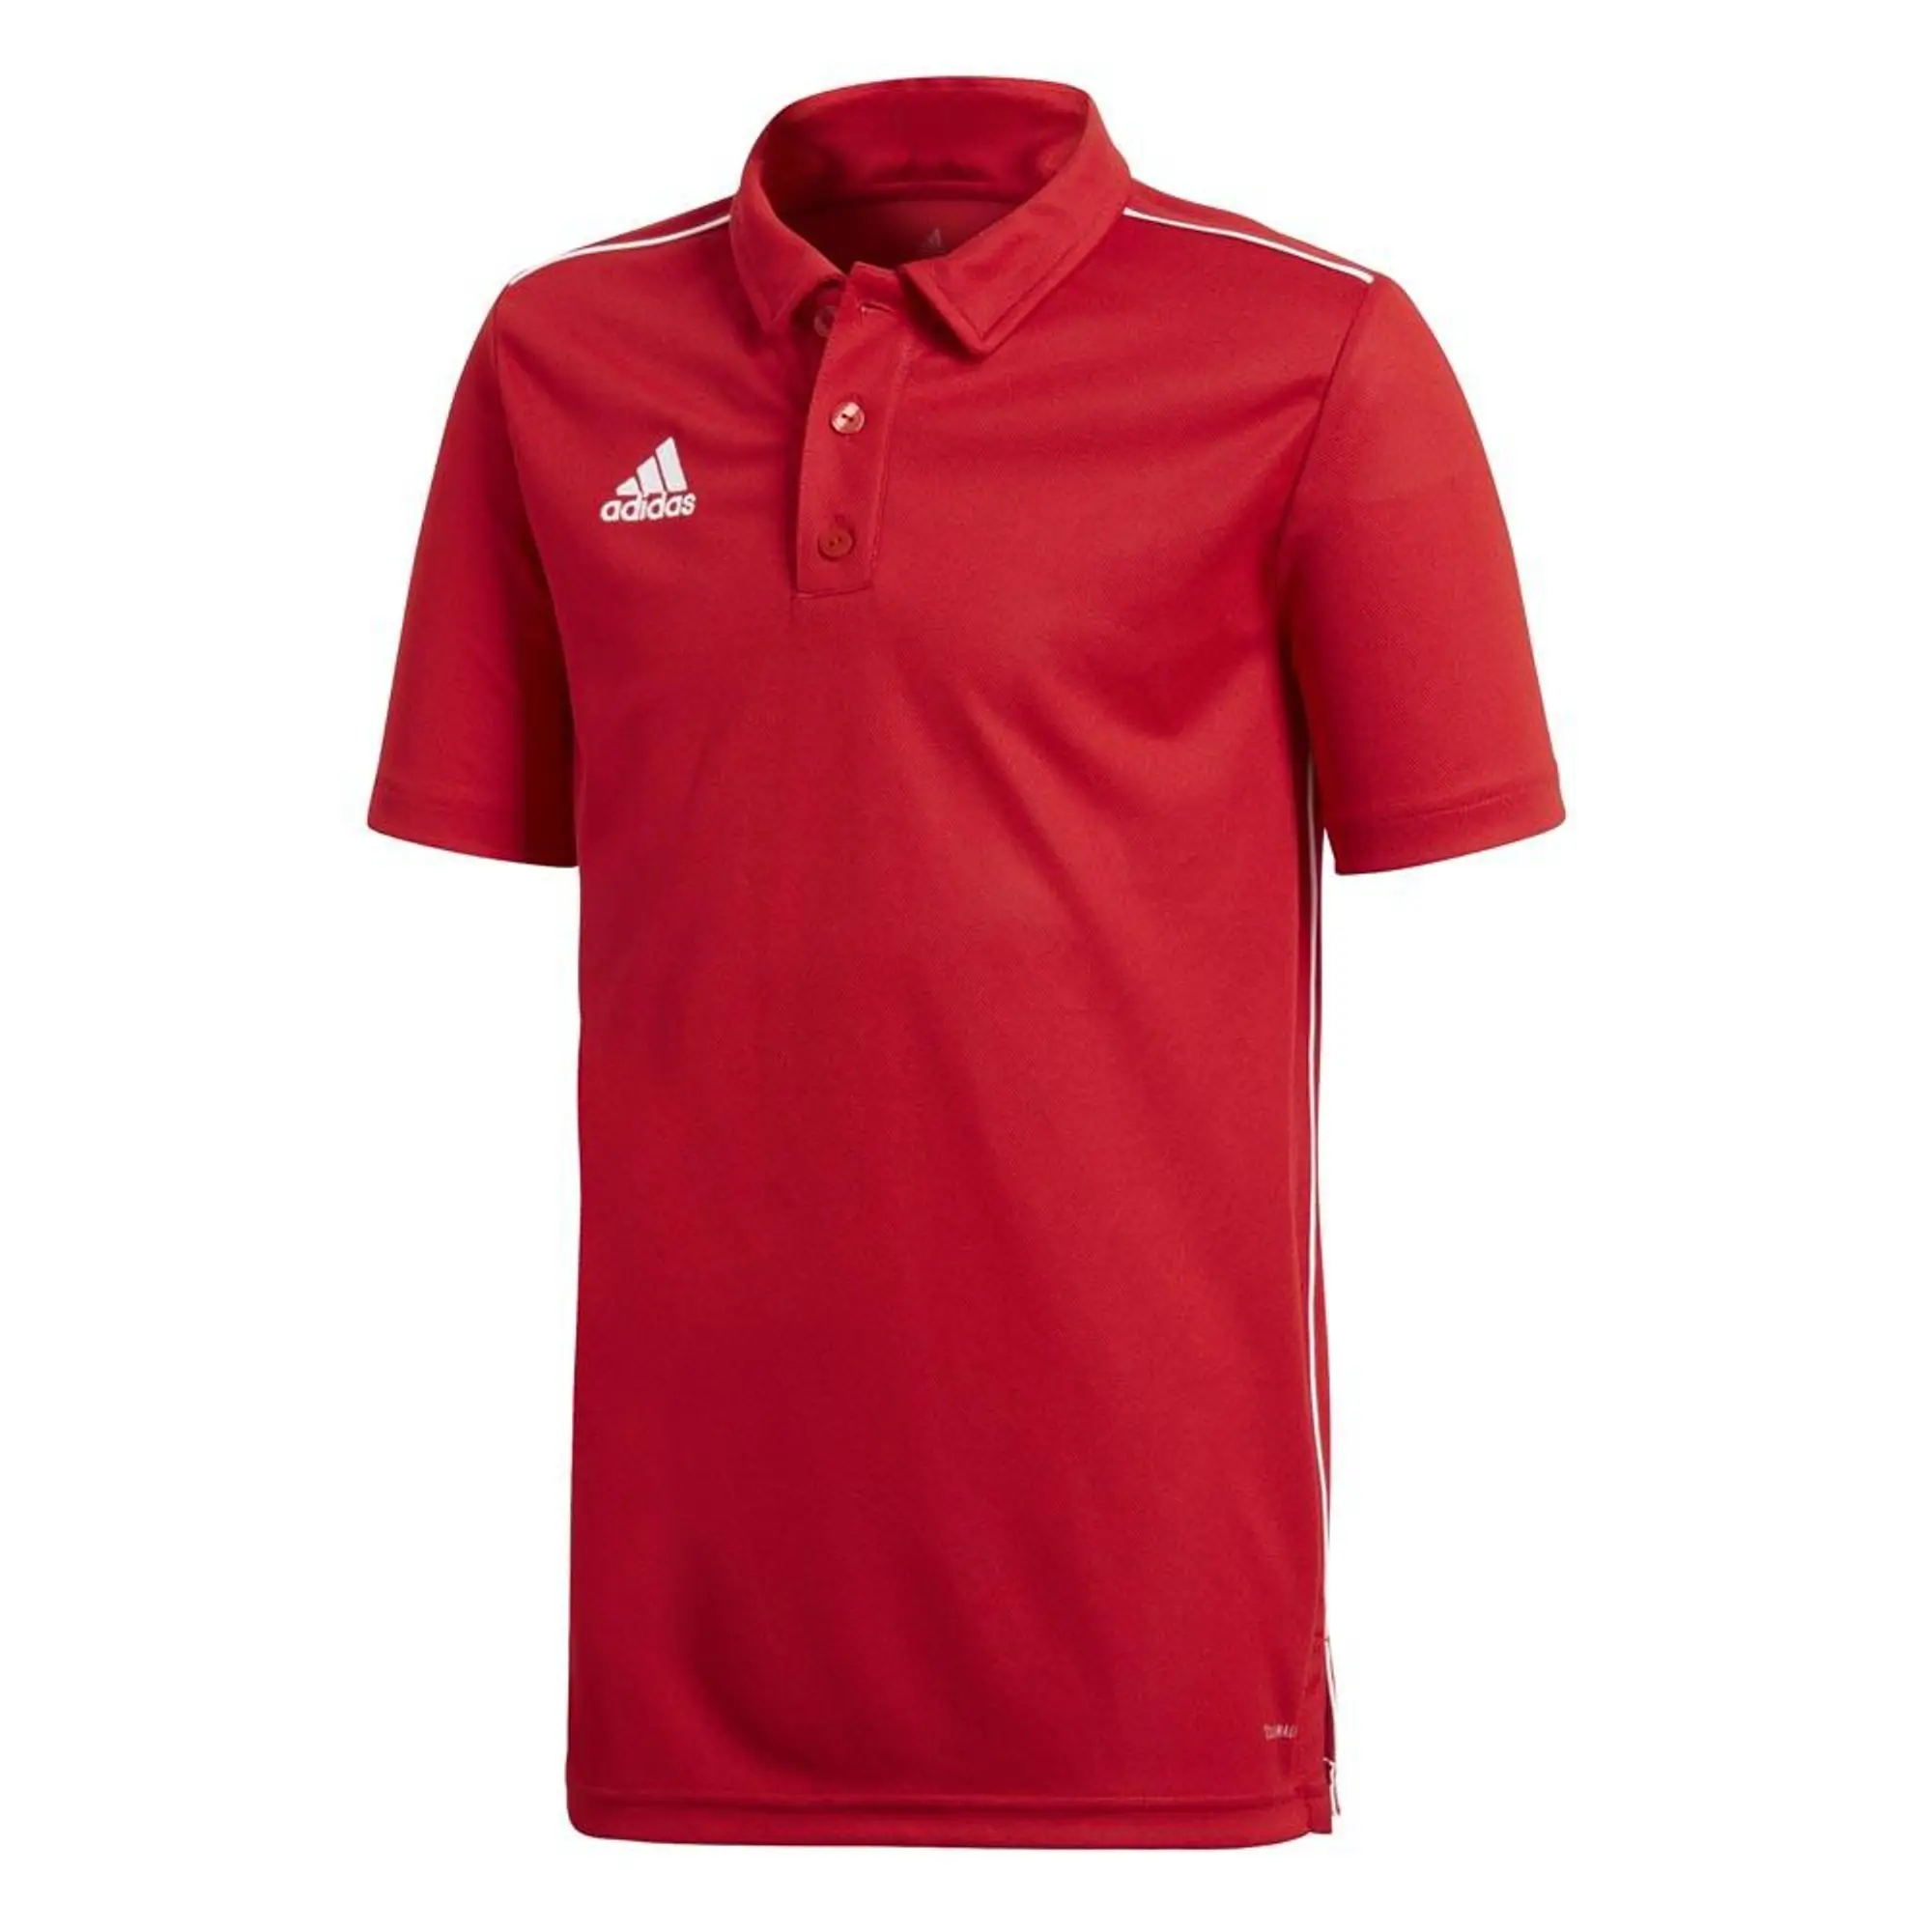 Adidas Core 18 Climalite Short Sleeve Polo Shirt  - Red